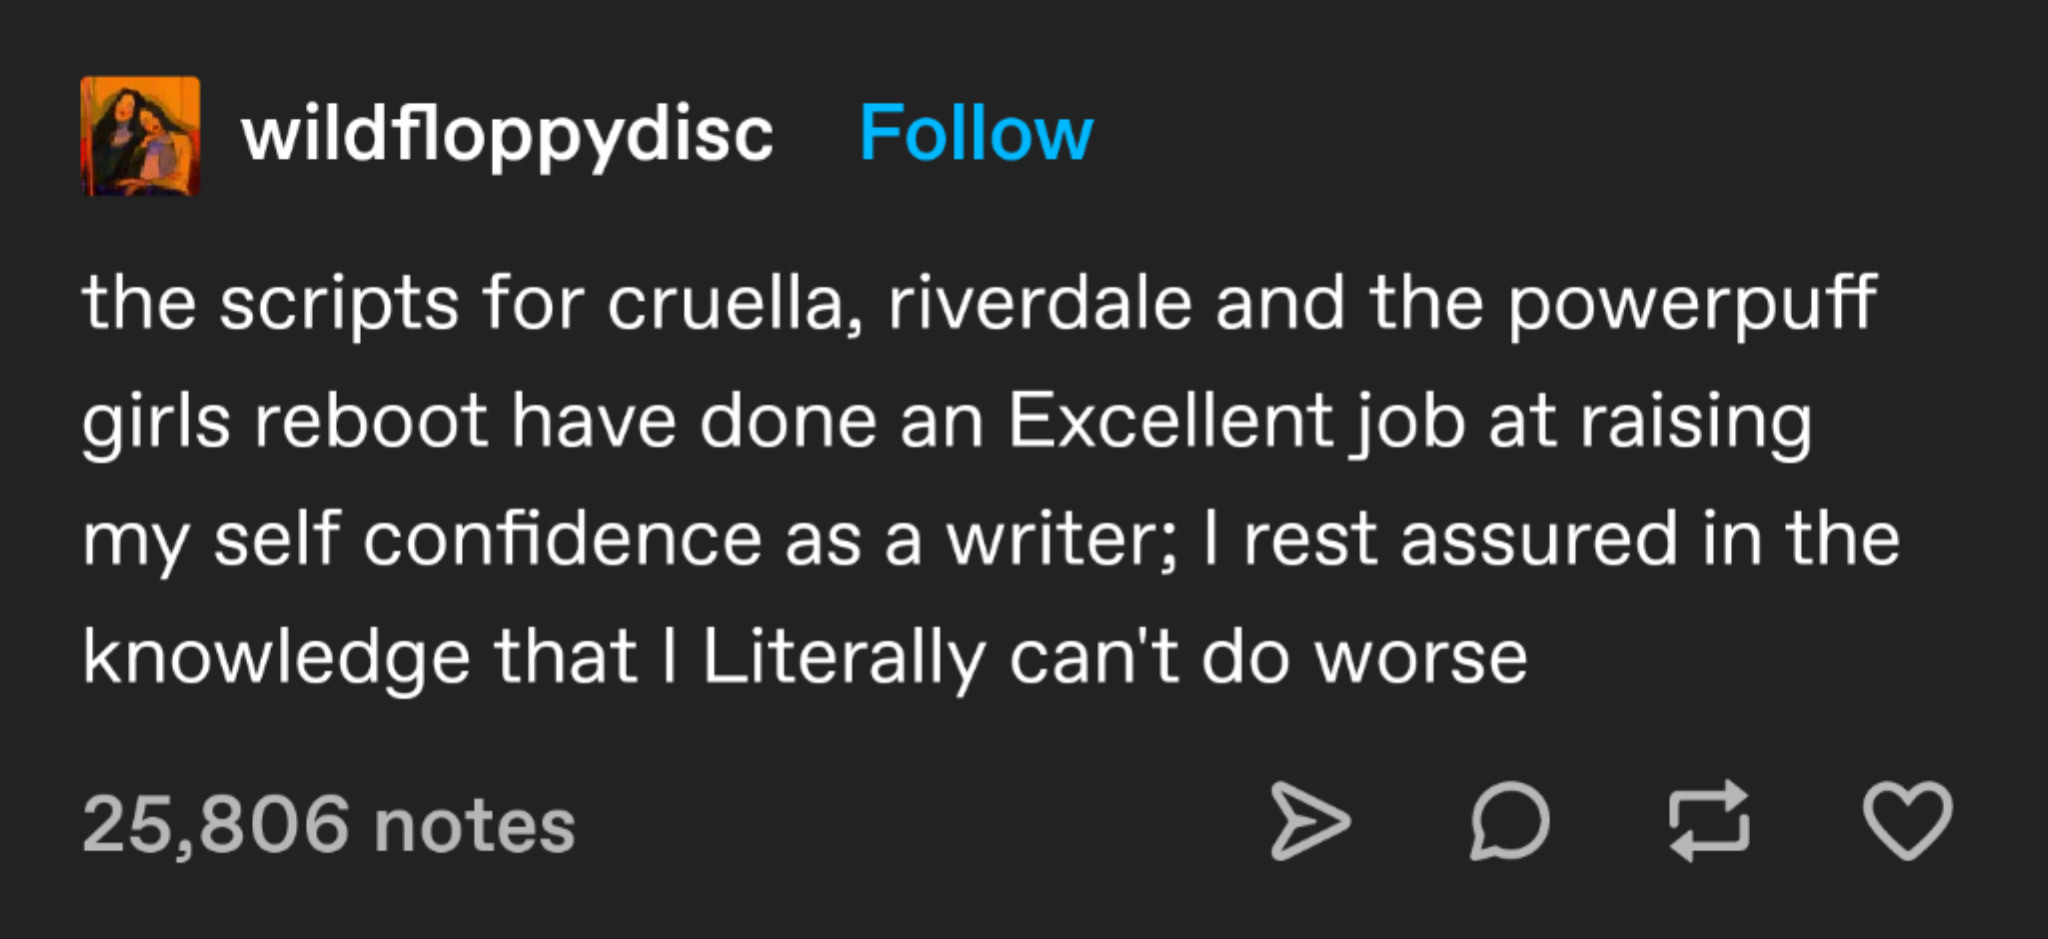 dank memes - number - wildfloppydisc the scripts for cruella, riverdale and the powerpuff girls reboot have done an Excellent job at raising my self confidence as a writer; I rest assured in the knowledge that I Literally can't do worse 25,806 notes De Co